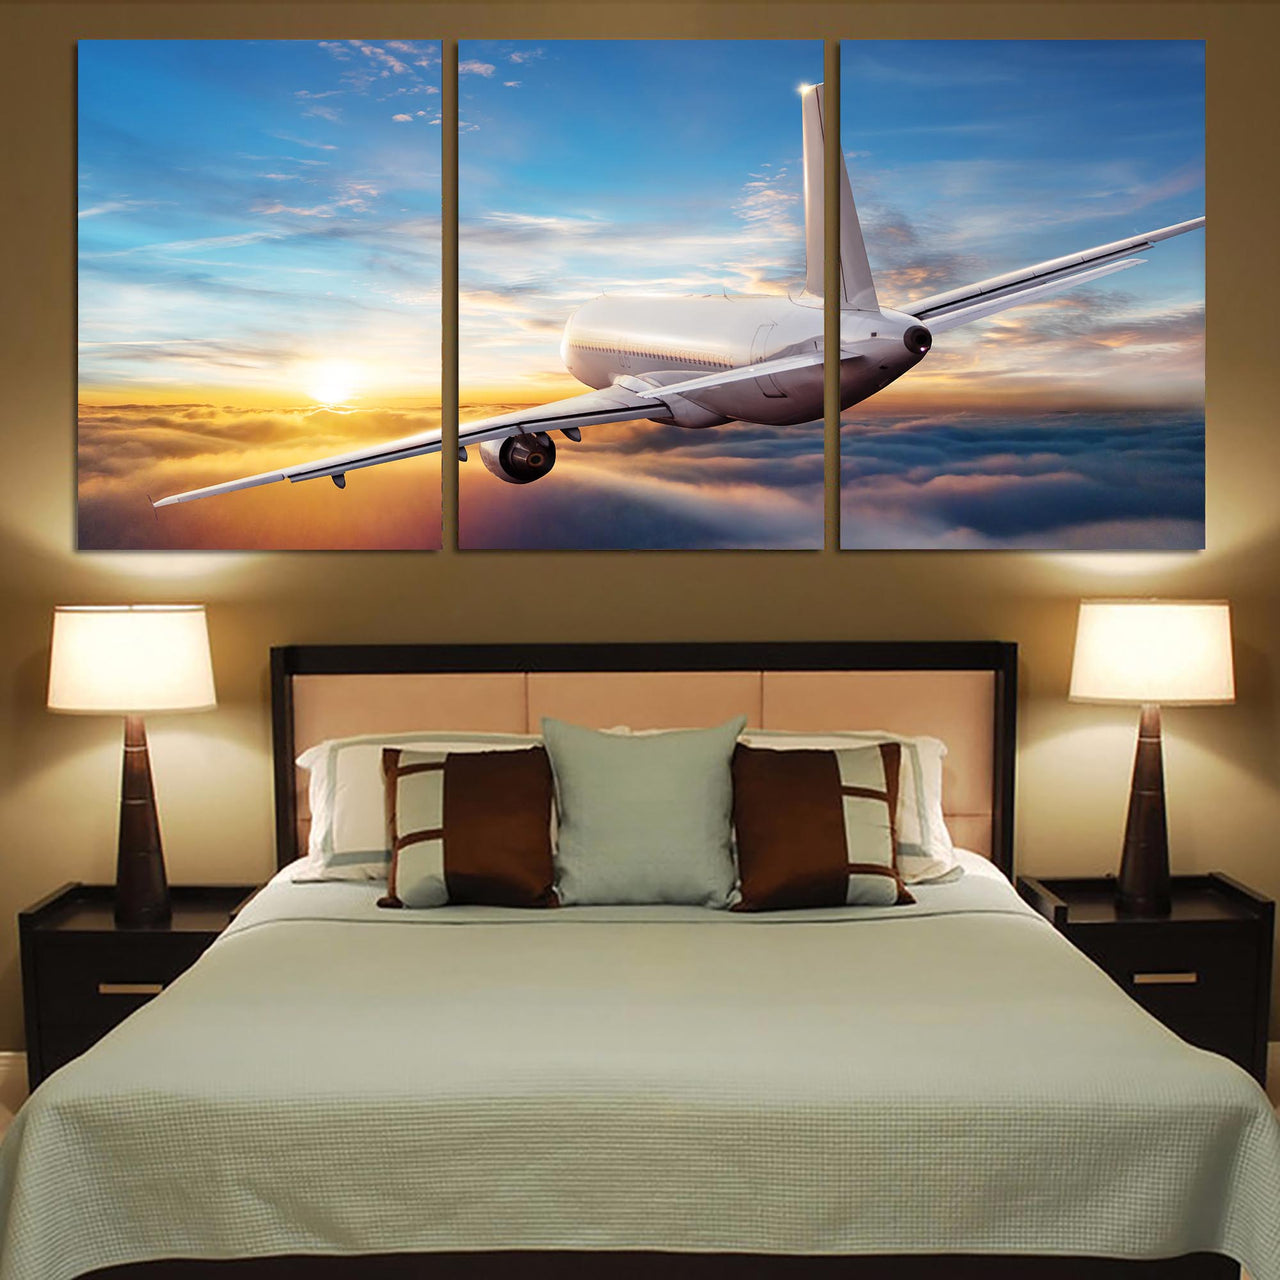 Airliner Jet Cruising over Clouds Printed Canvas Posters (3 Pieces)